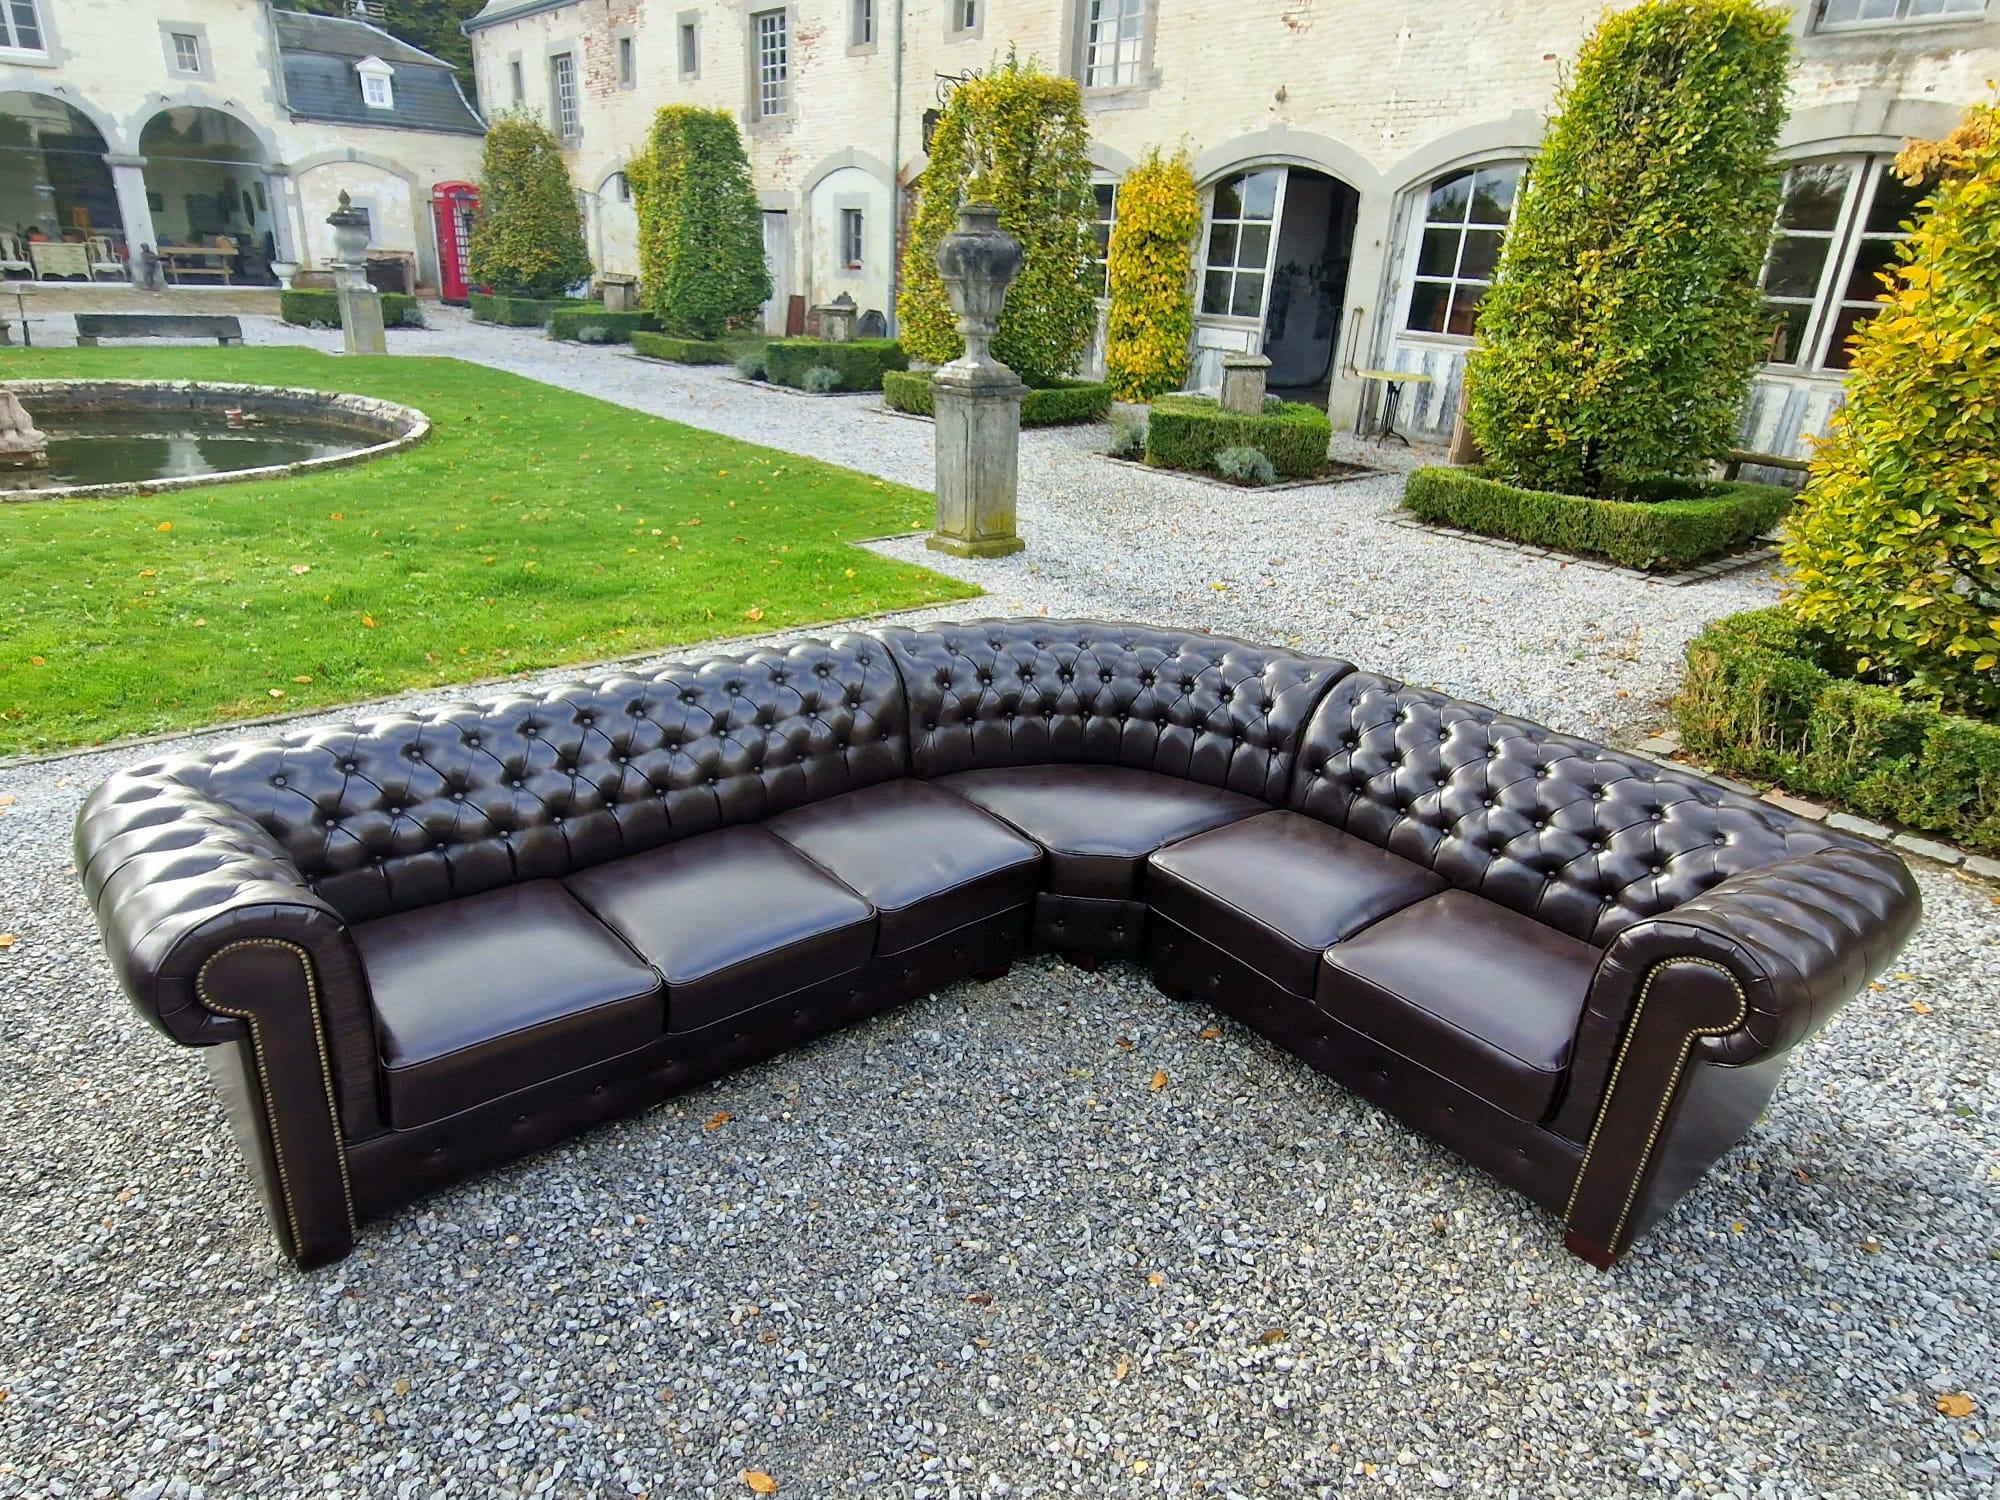 Pair of Large Vintage Leather Corner Chesterfield Sofas In Good Condition For Sale In Petworth,West Sussex, GB